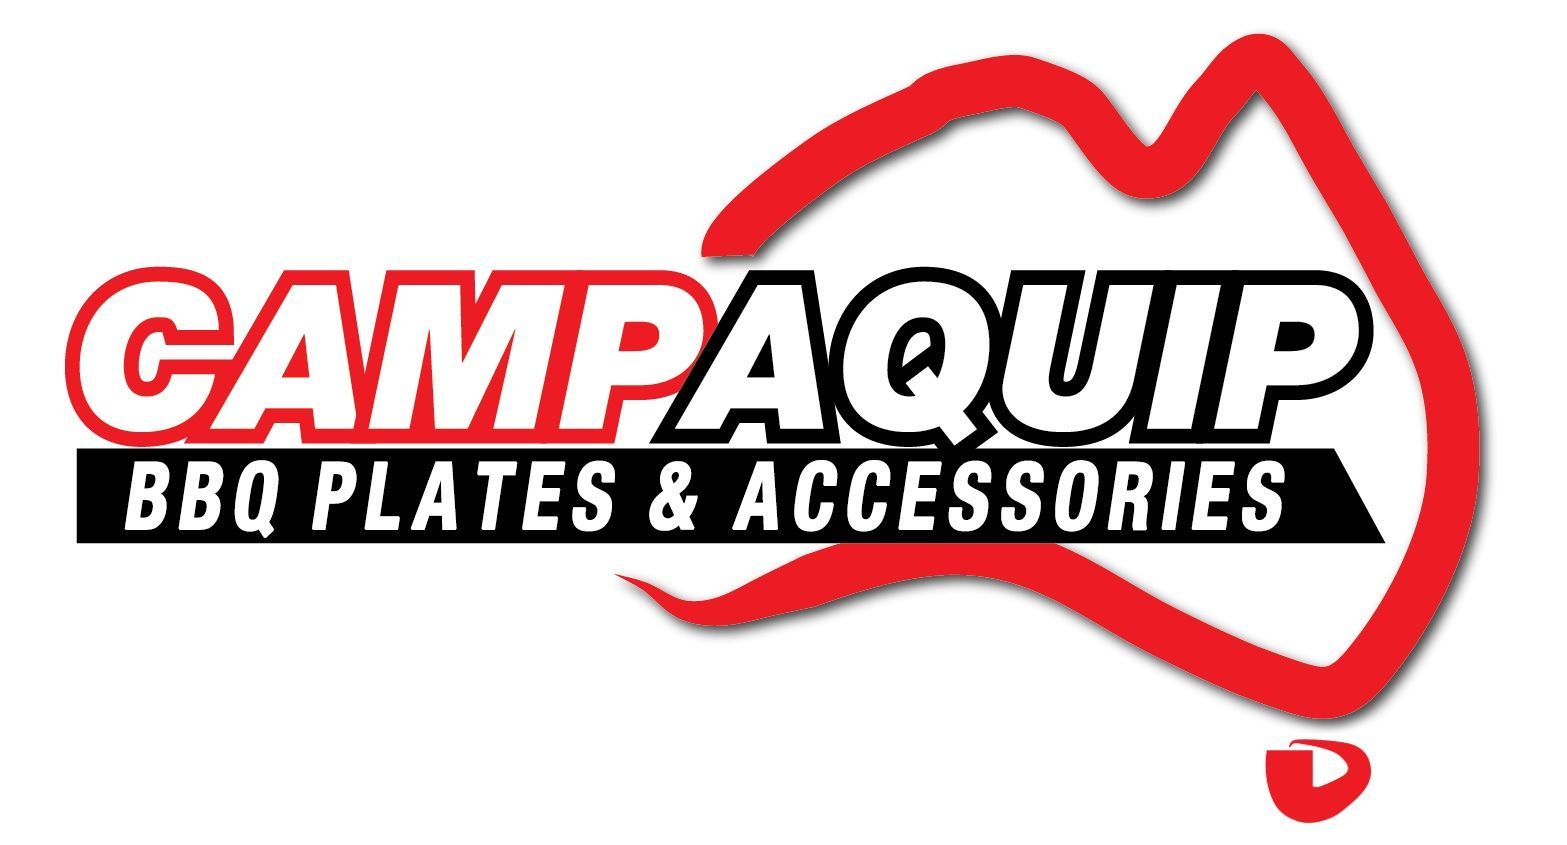 Campaquip: Griddle Plates in Shellharbour